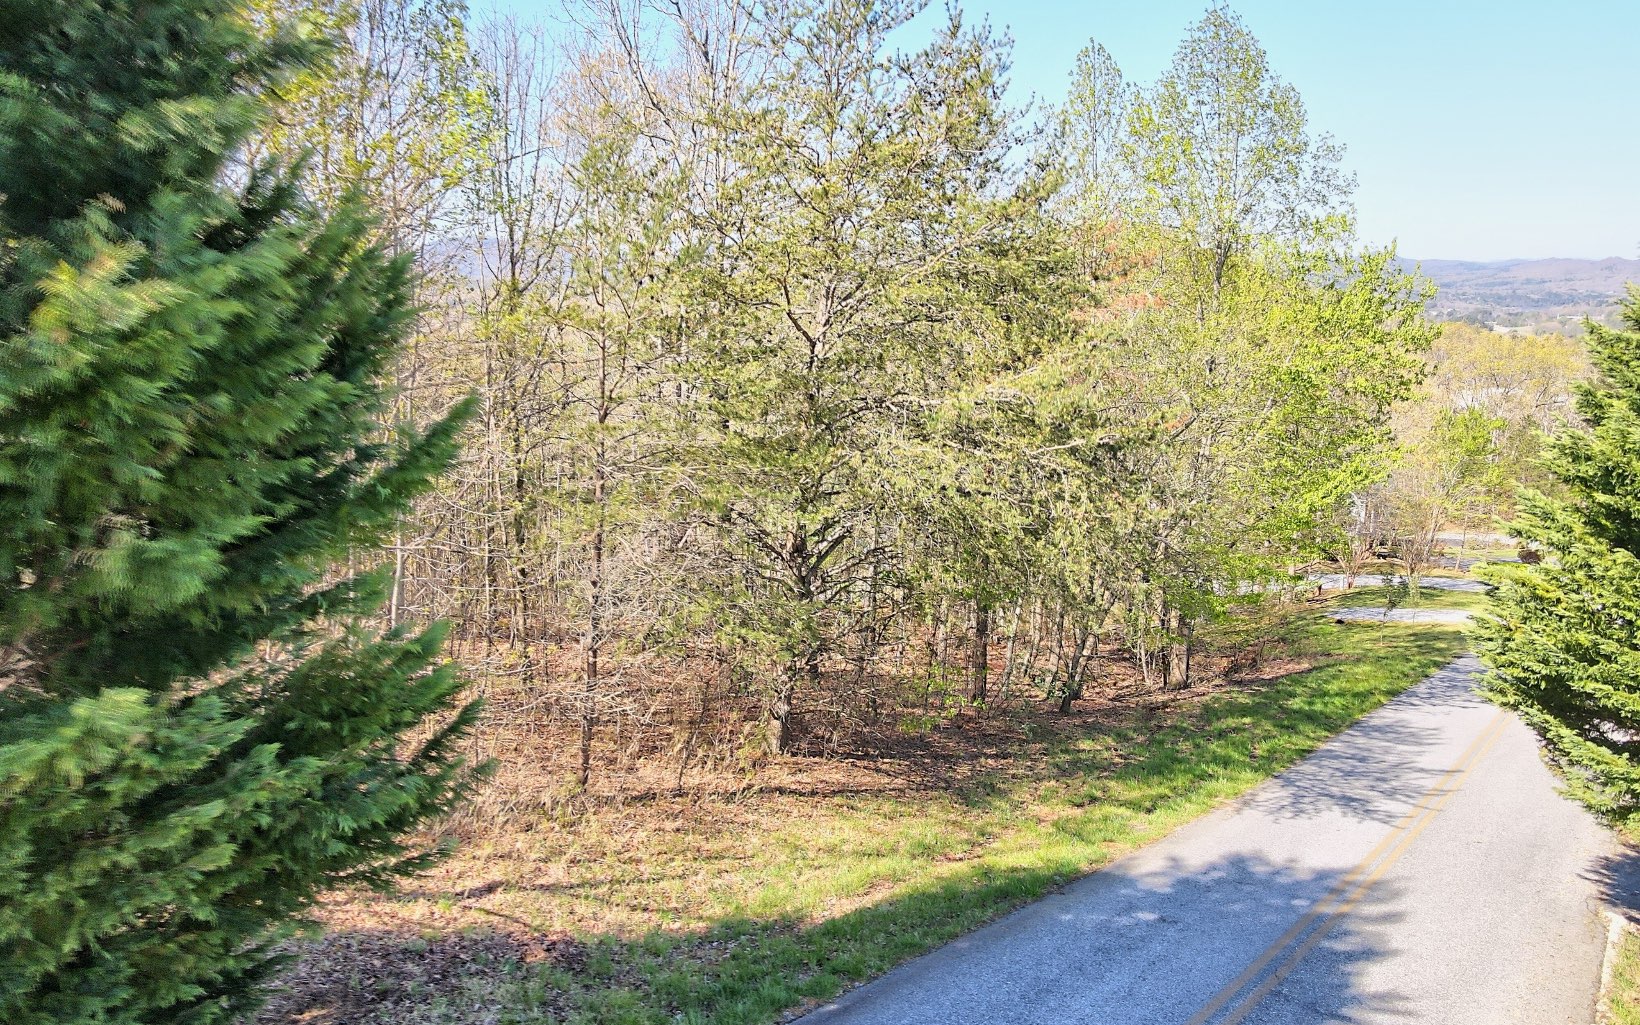 Big Views and Close to Downtown Blairsville! Very Nice Community of Homes and the Most Amazing Views in Union County. Come Build Your Dream Home Where There Are Covenants and Restrictions to Protect Your Views and Community But No HOA Dues. The covenants a restrictions are minimal and possibly expired.